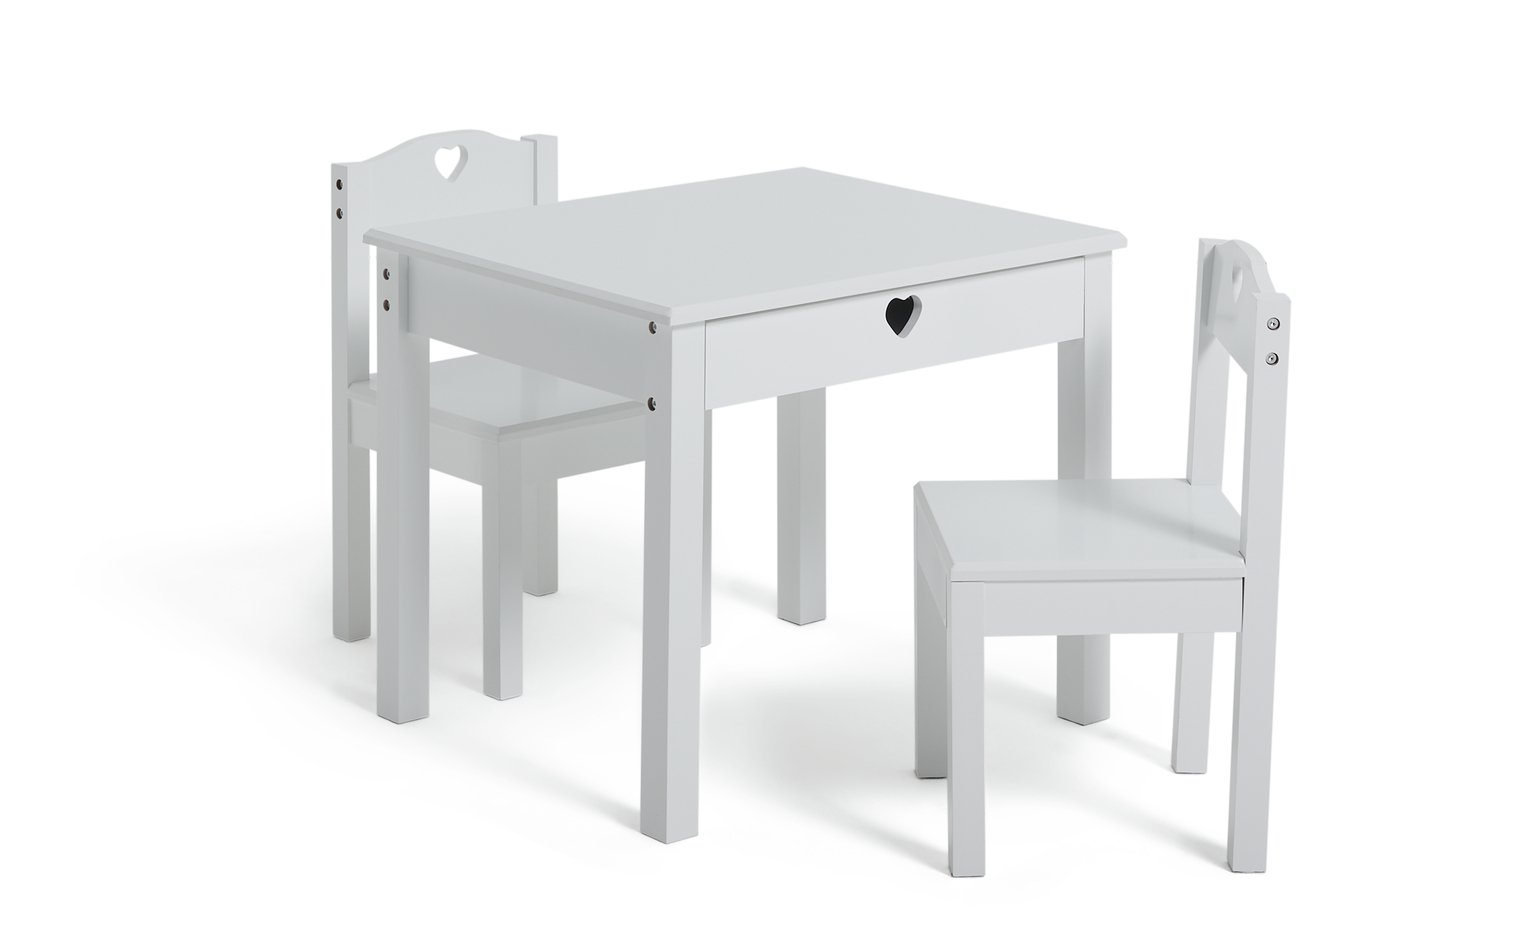 childrens small table and chairs